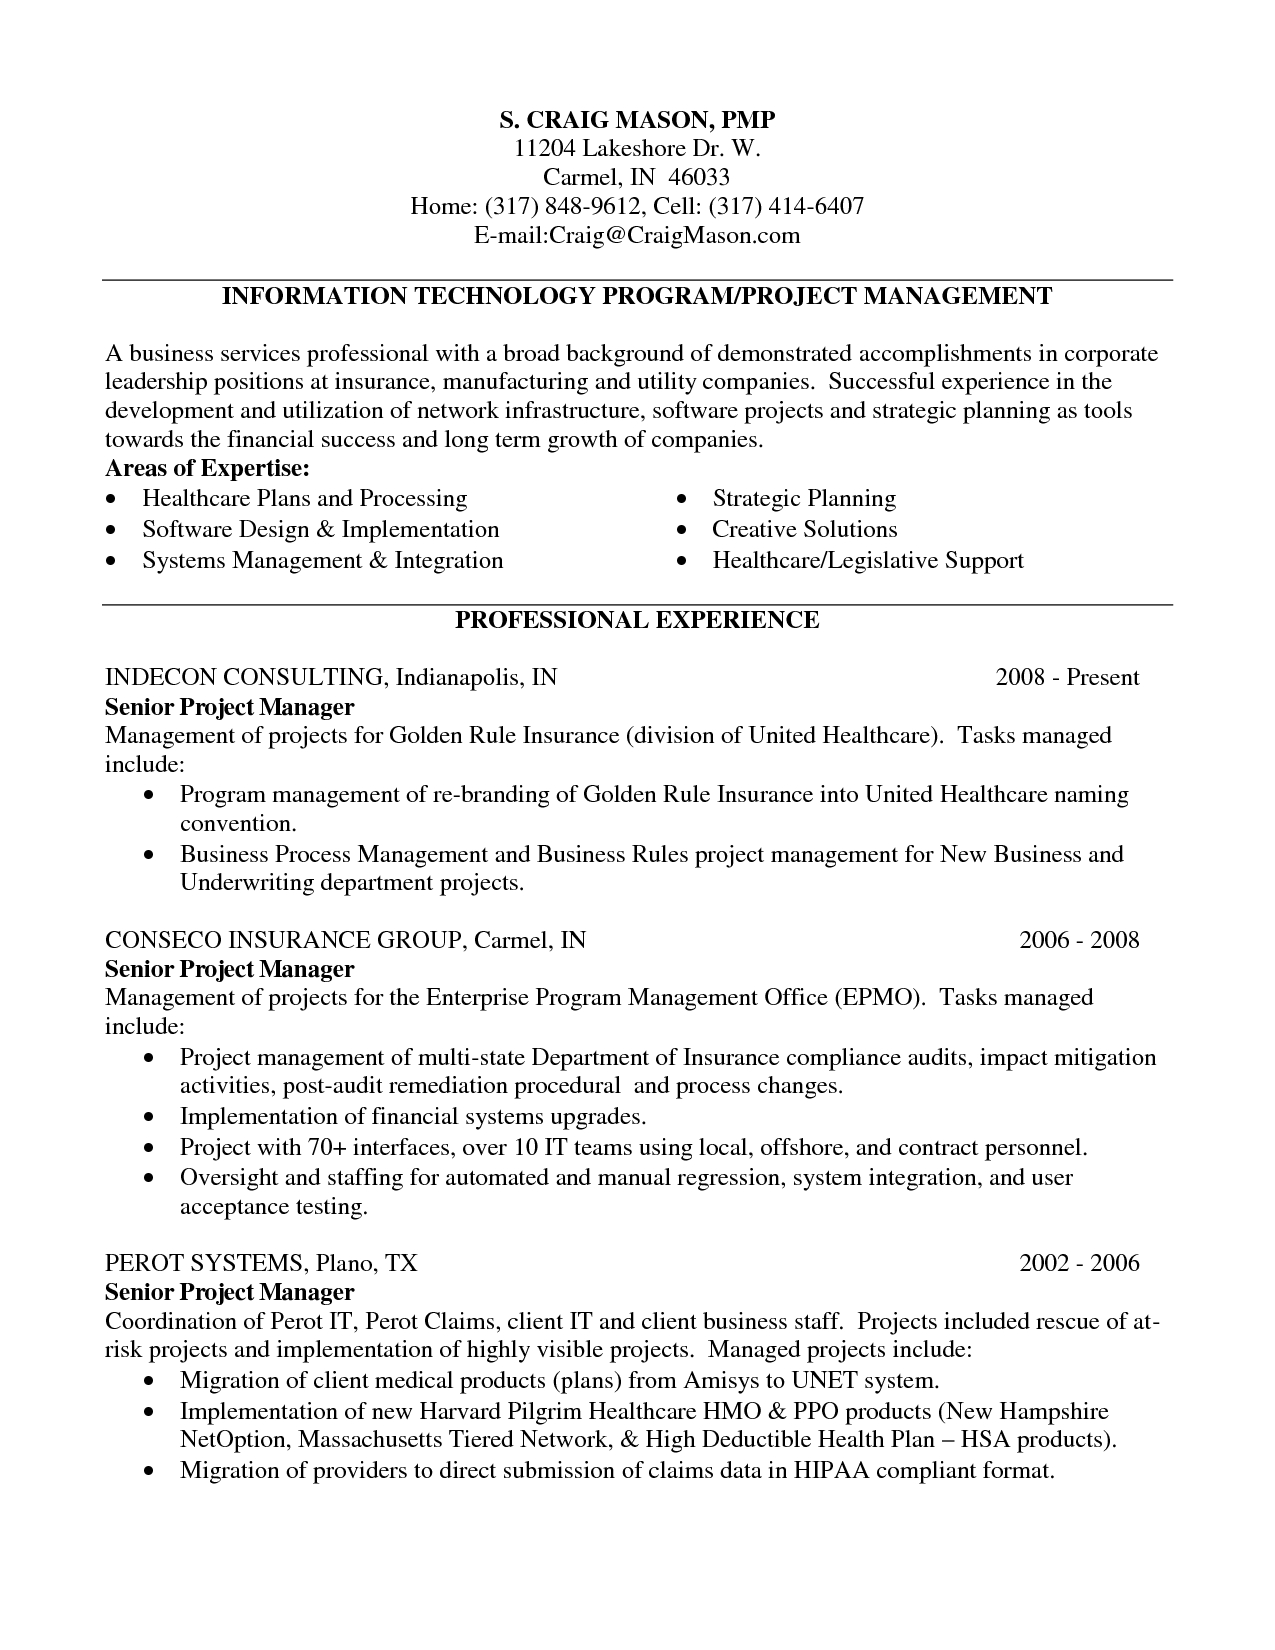 Cover Letter Template Healthcare - software Project Manager Resume software Project Manager Resume Mark